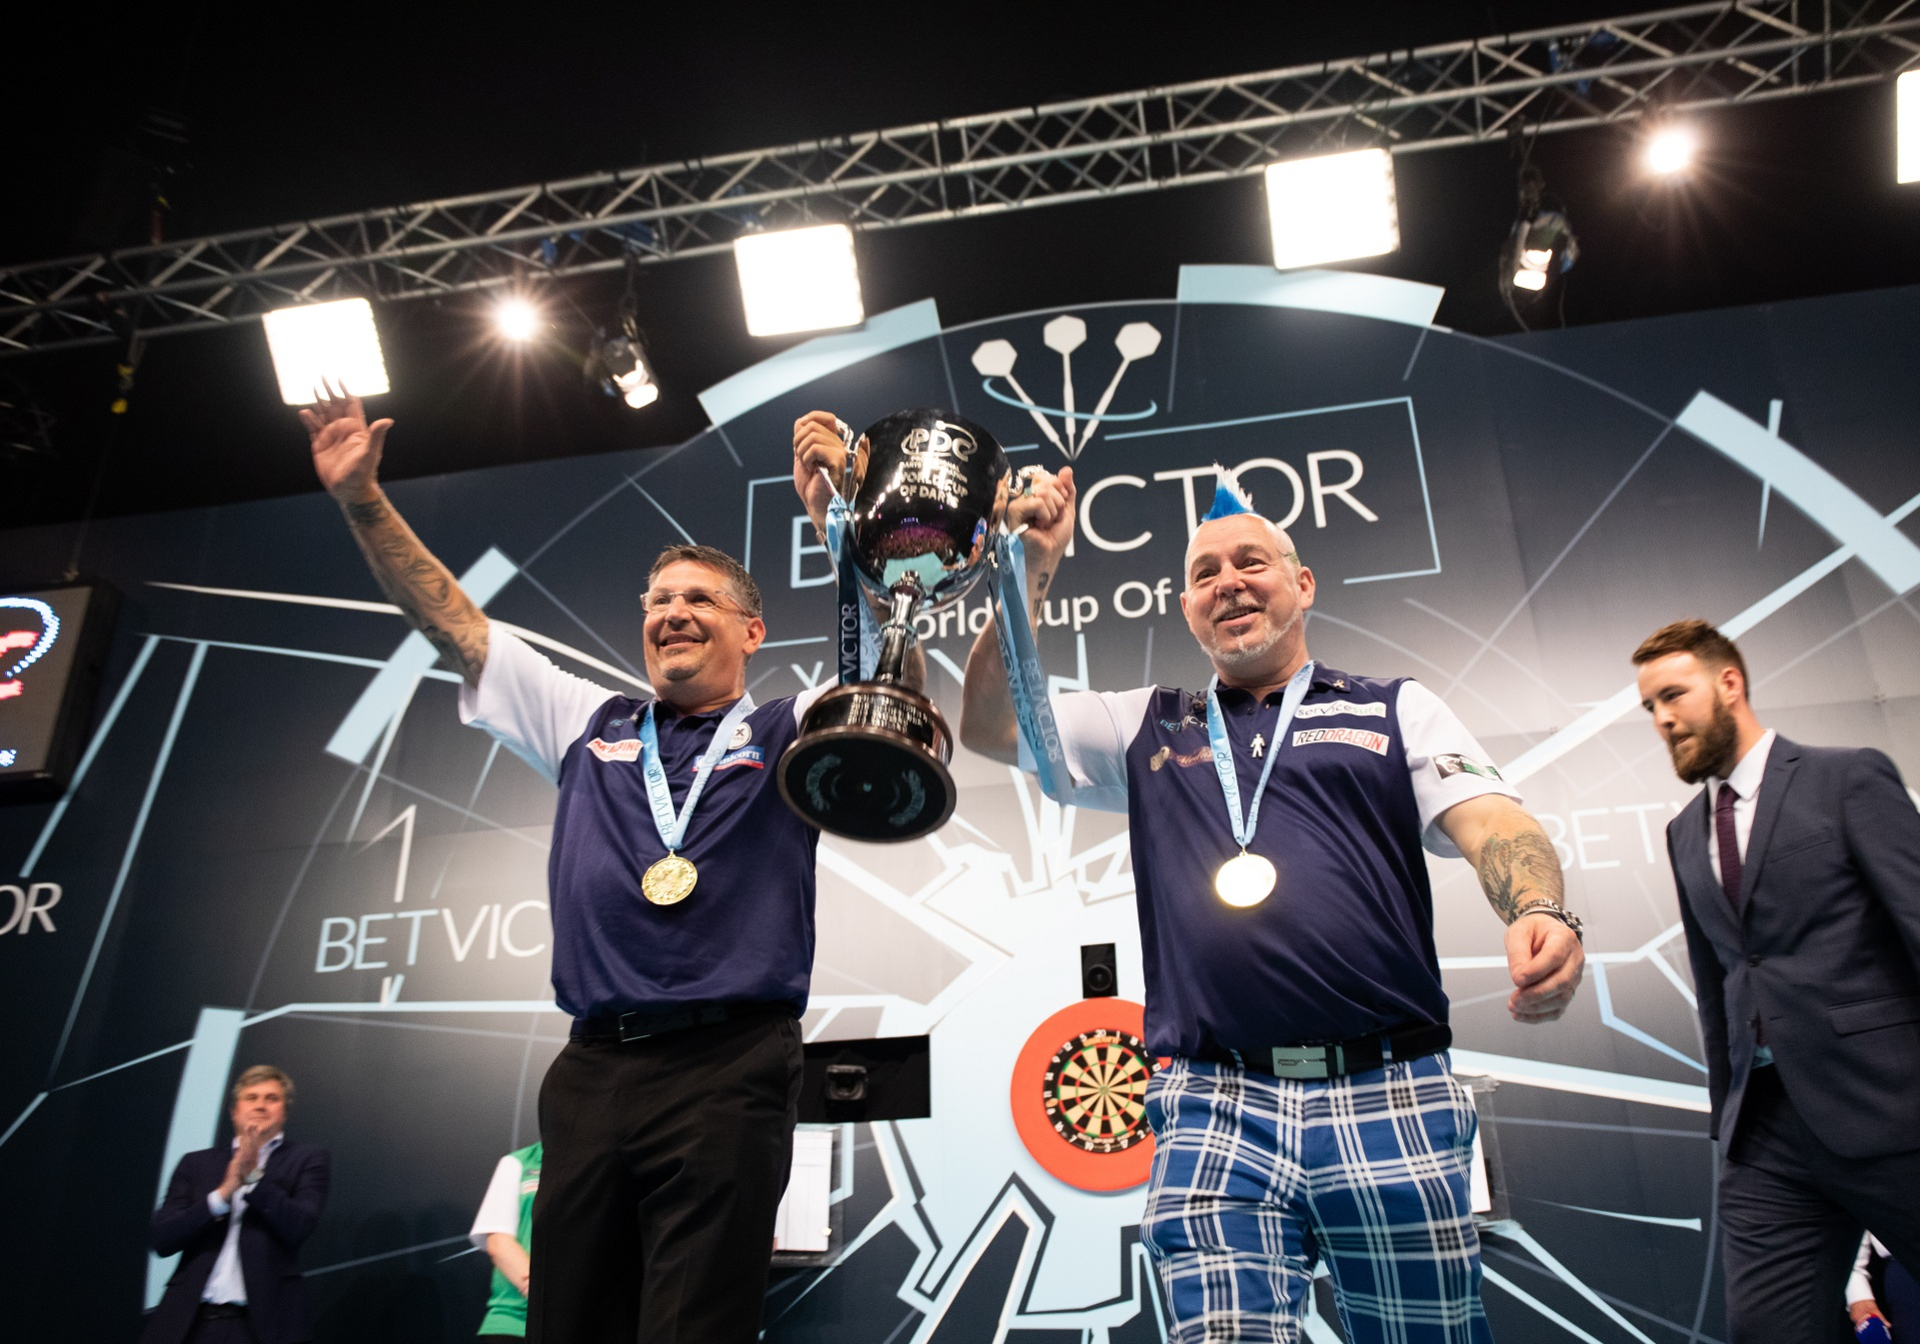 Gary Anderson & Peter Wright